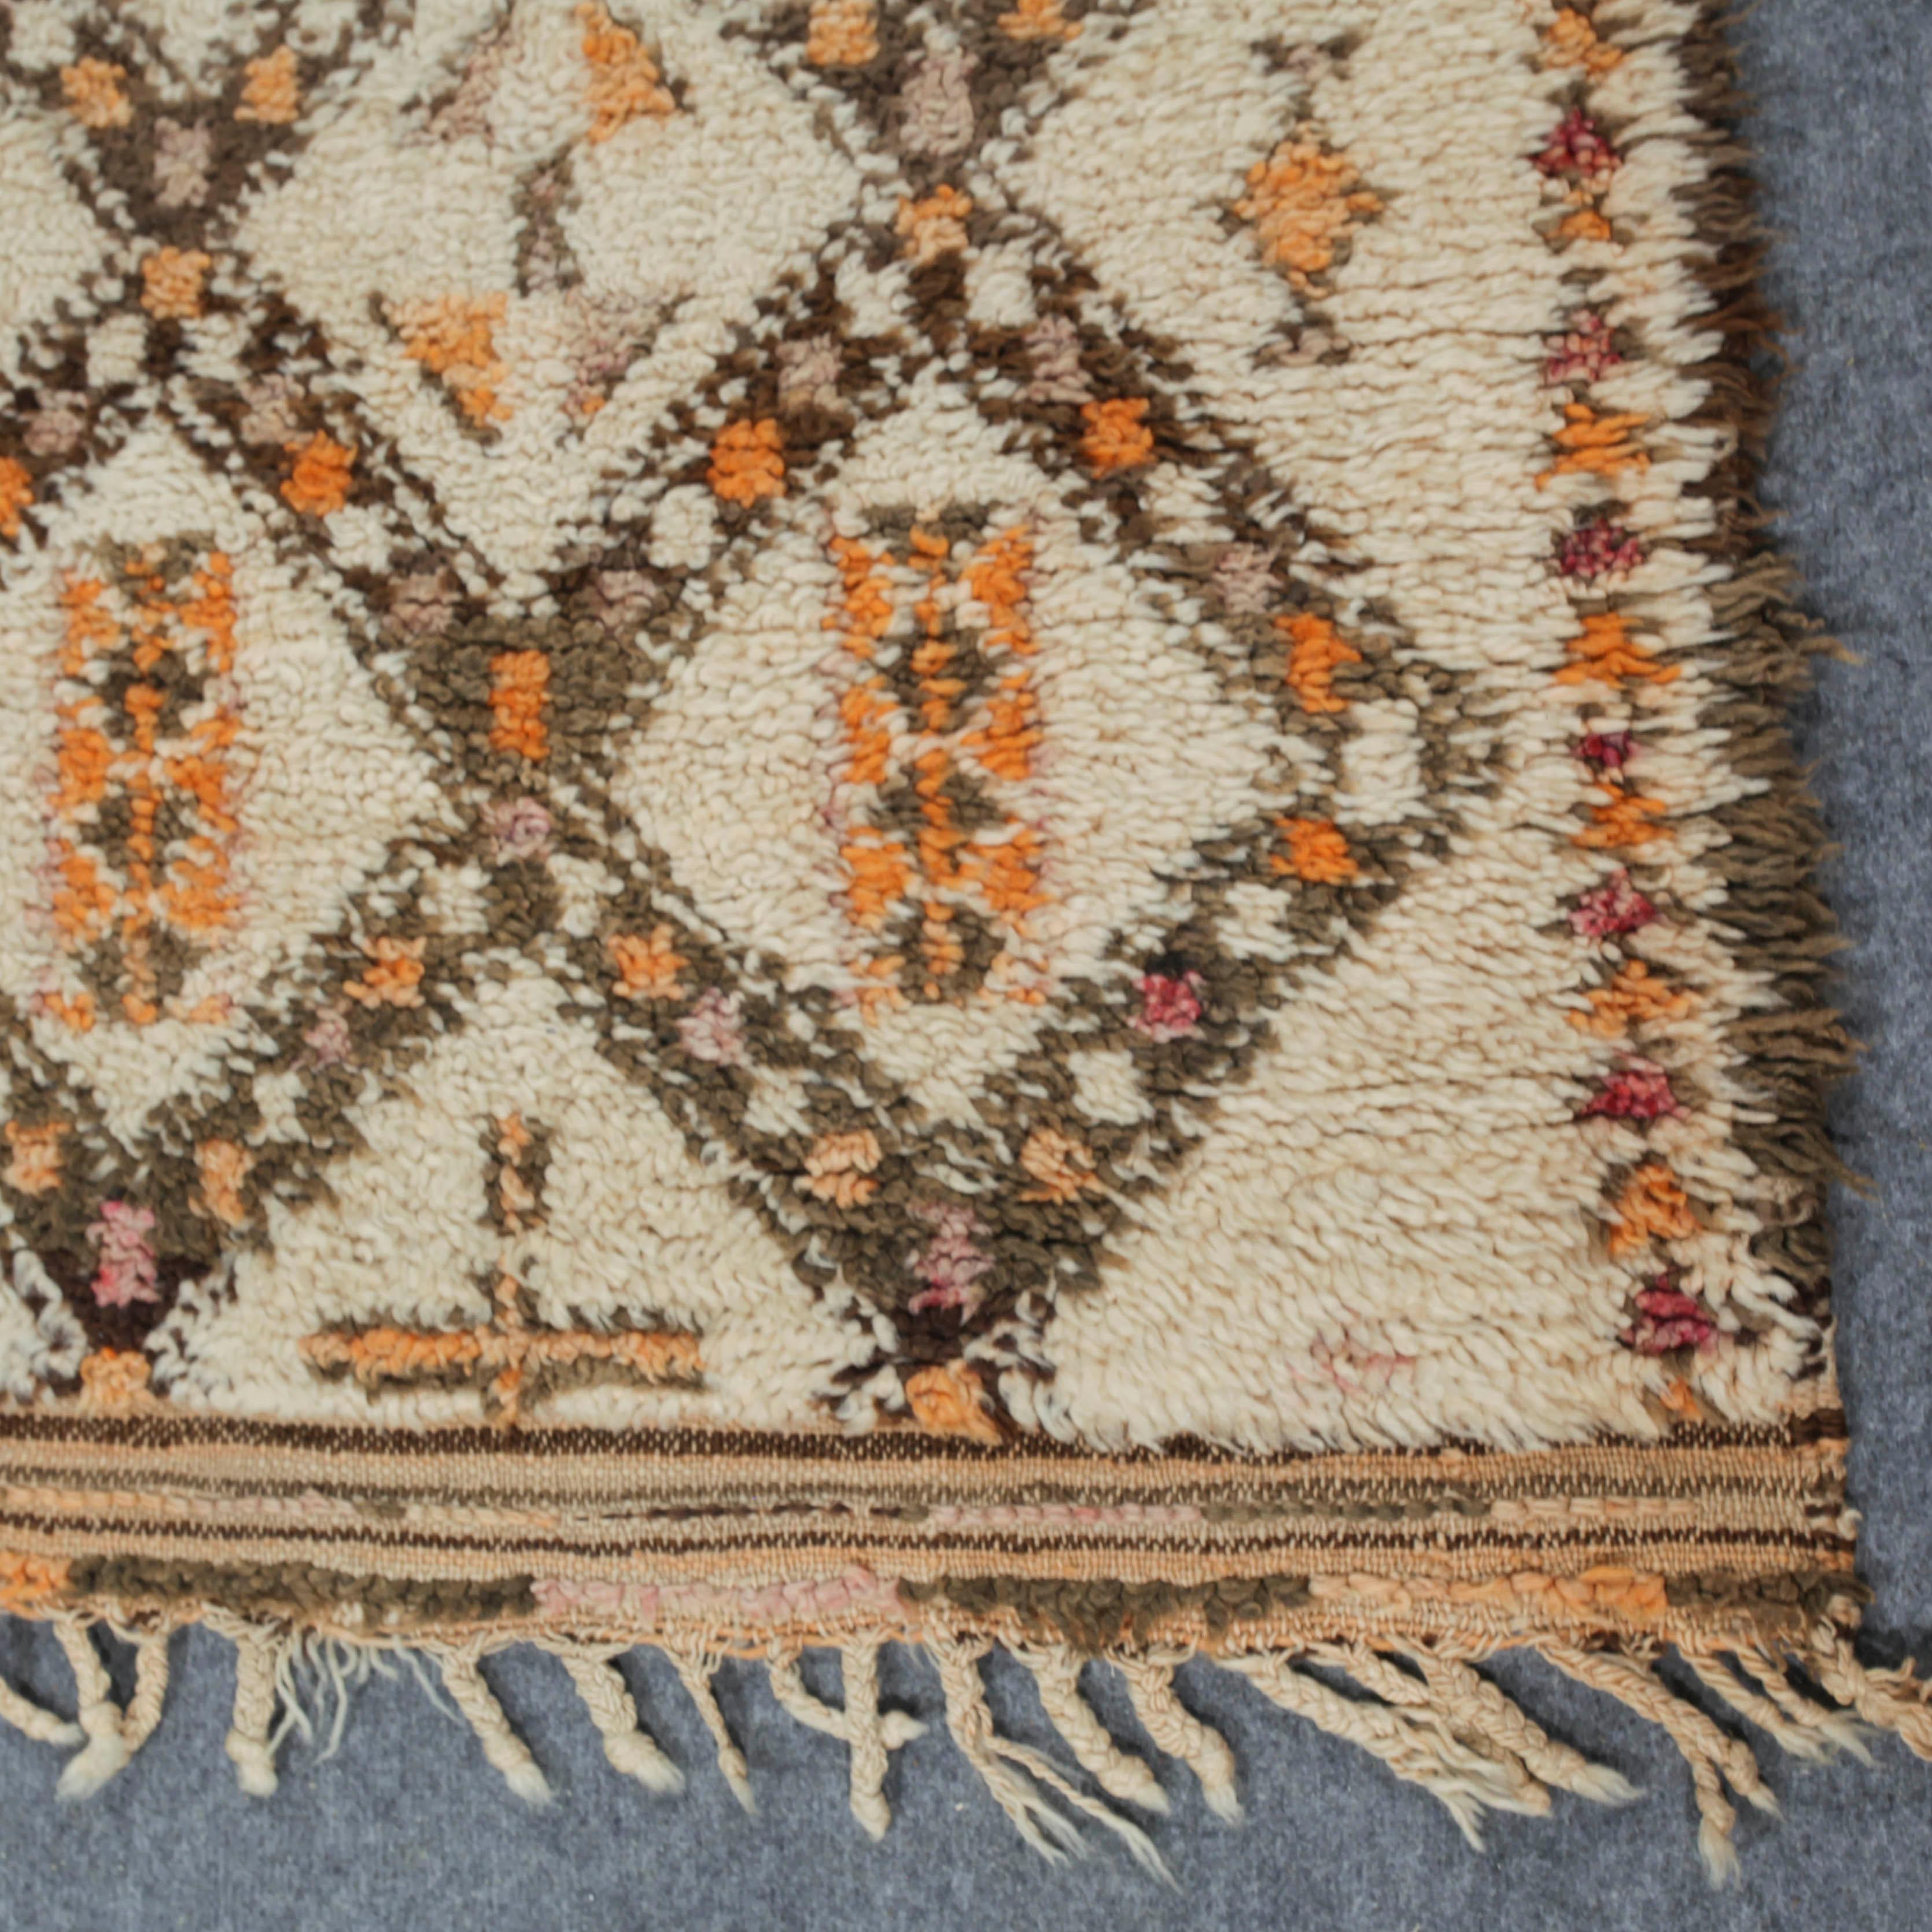 Vintage Moroccan Berber Rug with Henna Accents 2